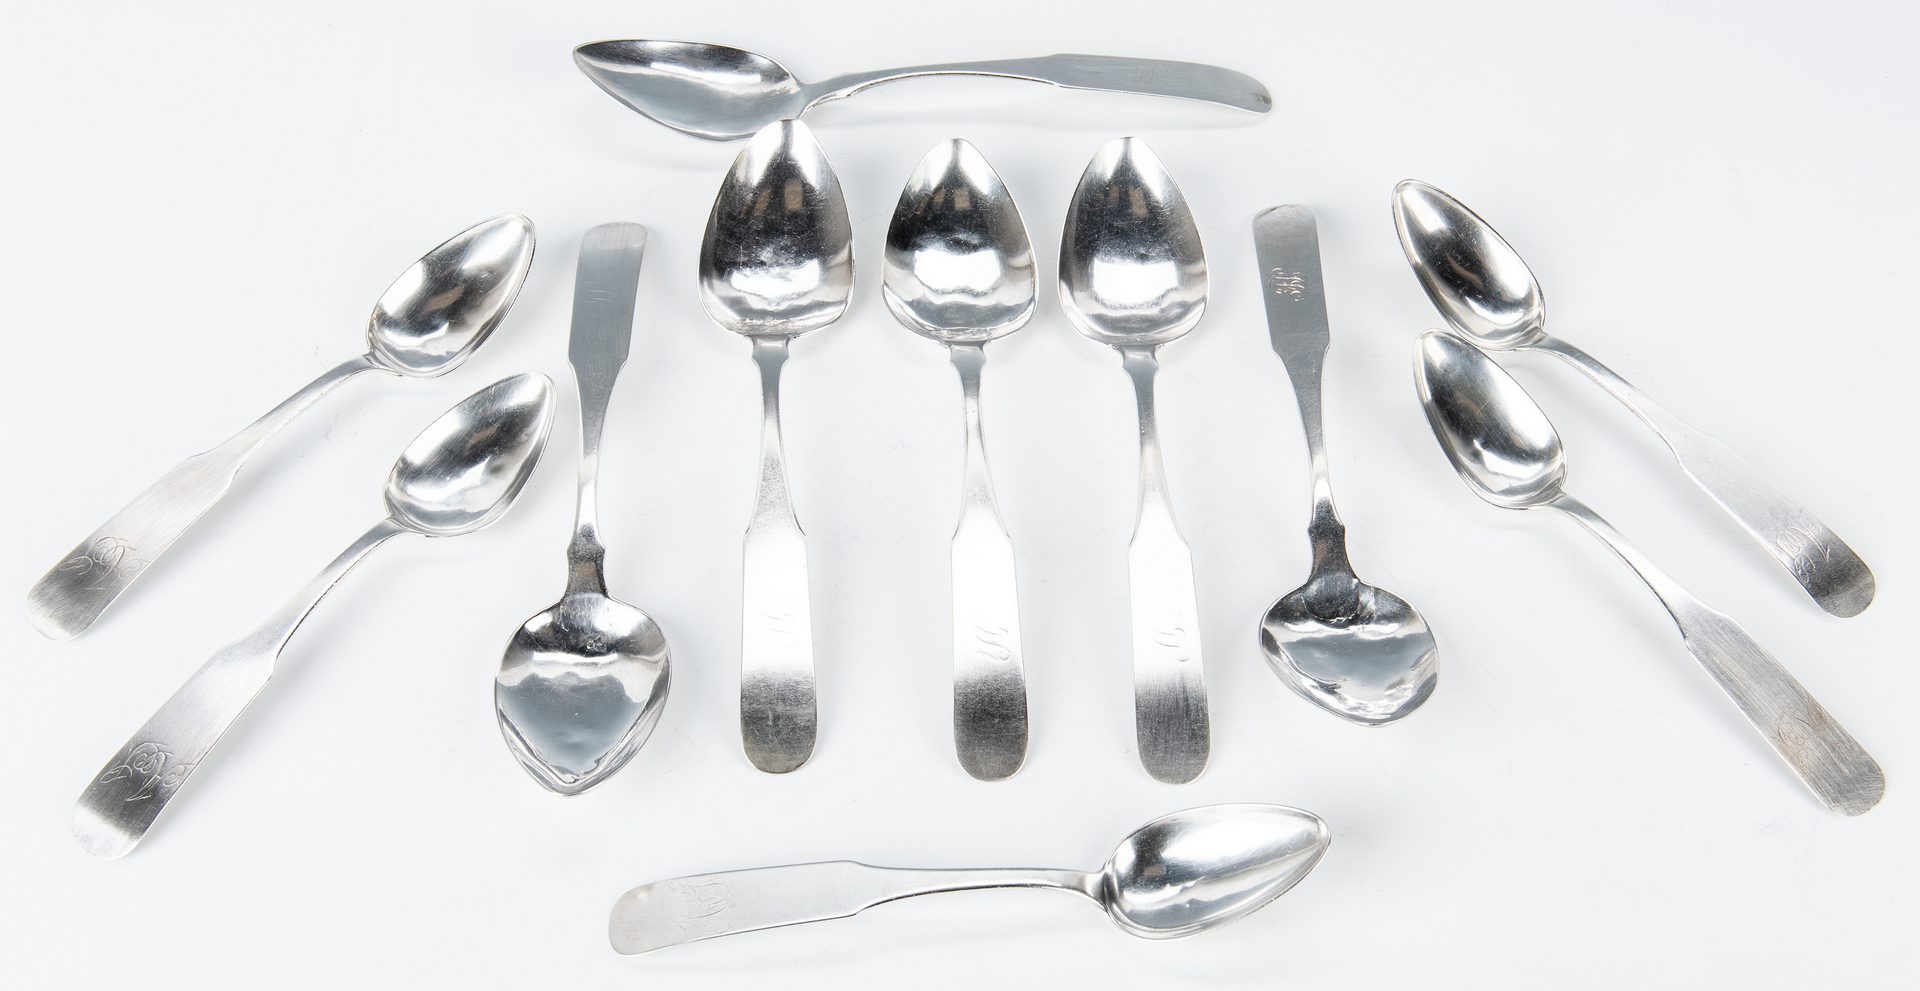 Lot 188: 11 TN Coin Silver Spoons, Samuel Bell and Atkinson & Boyce